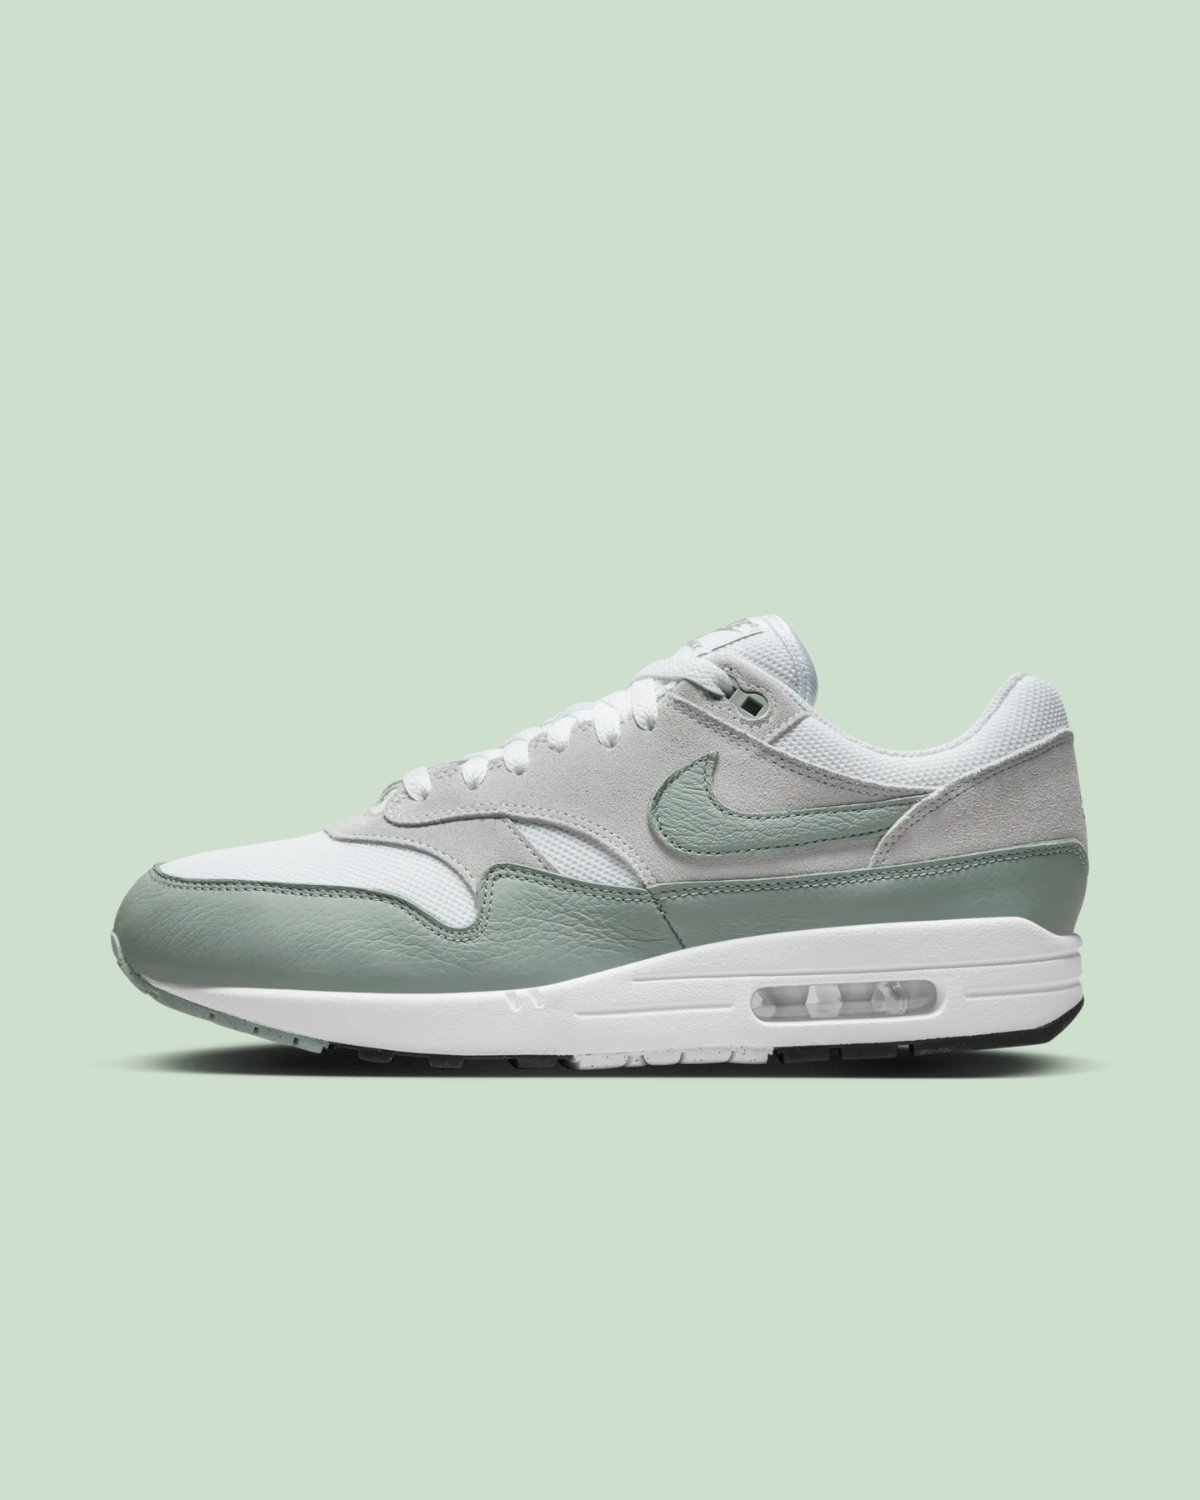 on Twitter: "Laidback easy-to-style. The Air Max 1 'Mica Green' at 10am ET 🇺🇸 https://t.co/HcpkeB1nHe https://t.co/ZhfXQmE9ud" / Twitter